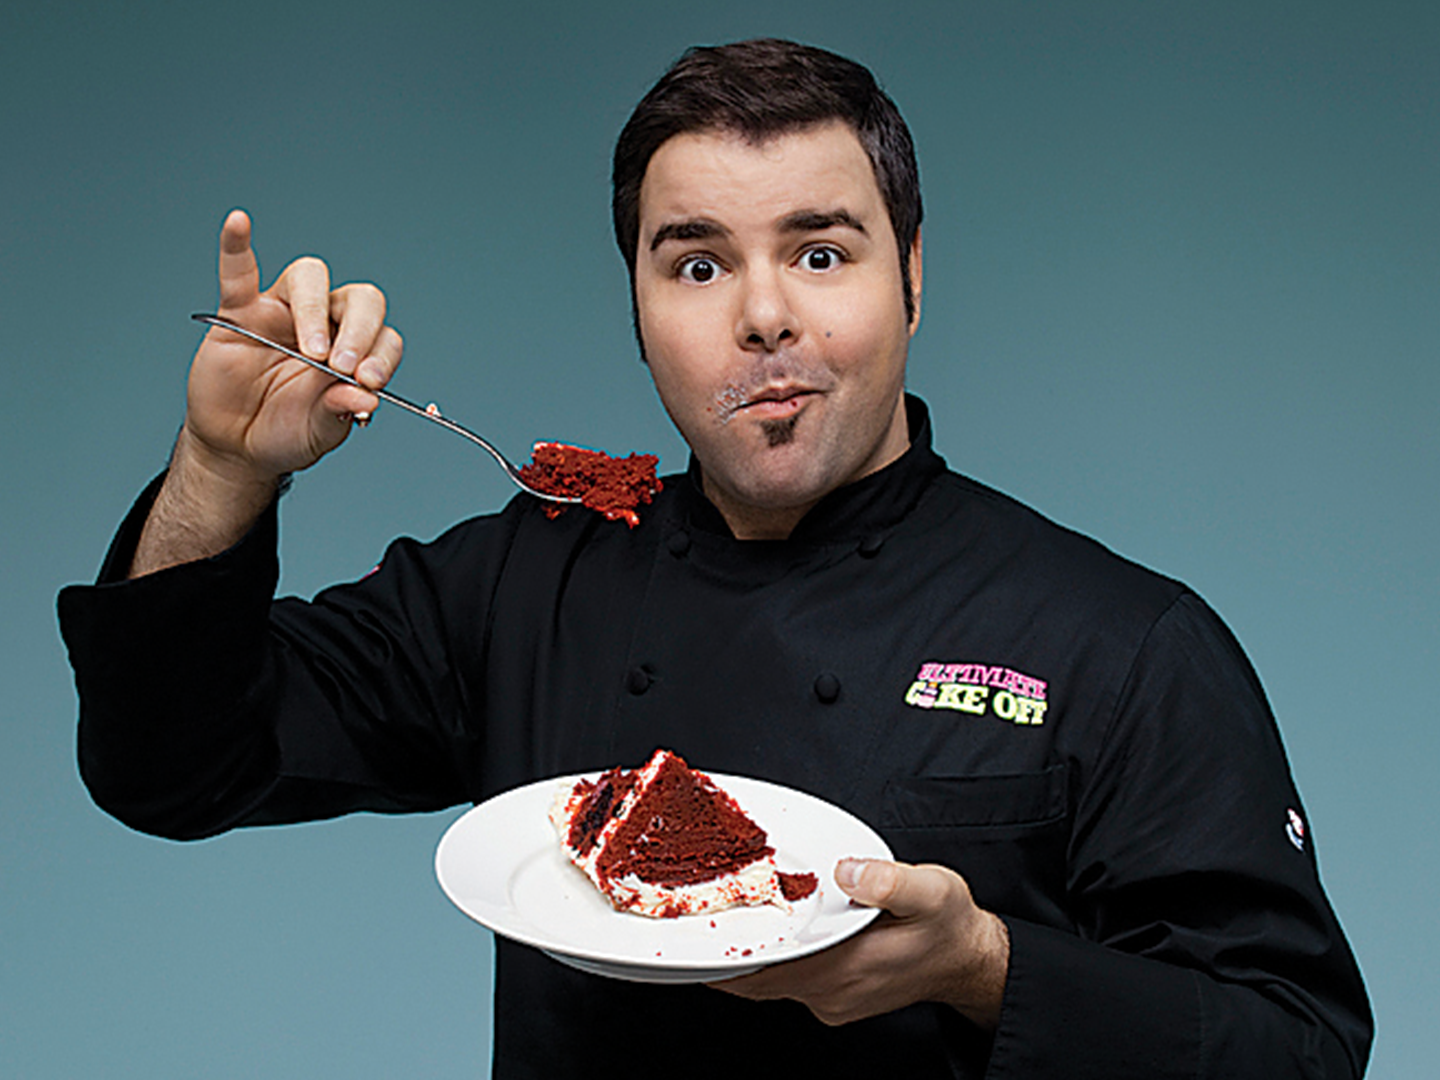 A chef wearing black suite and eating a cake.